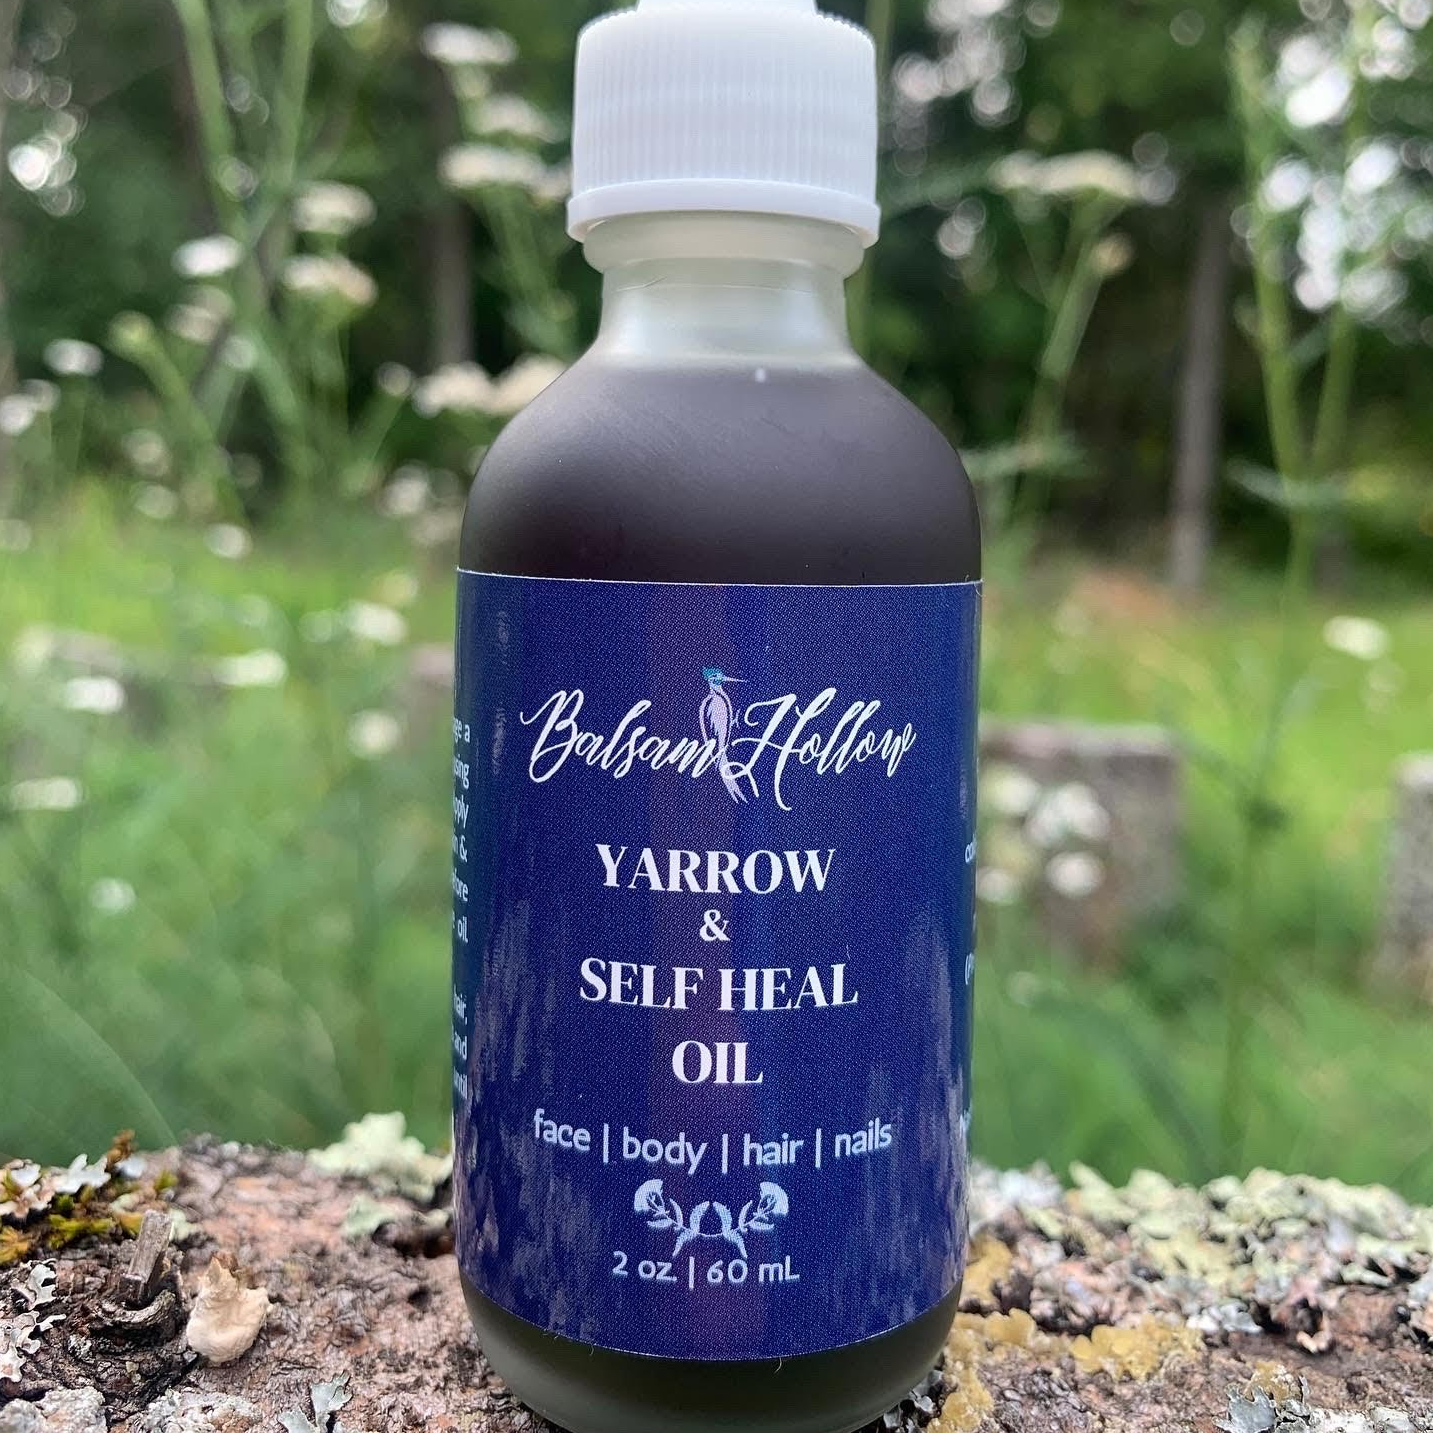 Balsam Hollow Yarrow and Self Heal Oil MADE SAFE